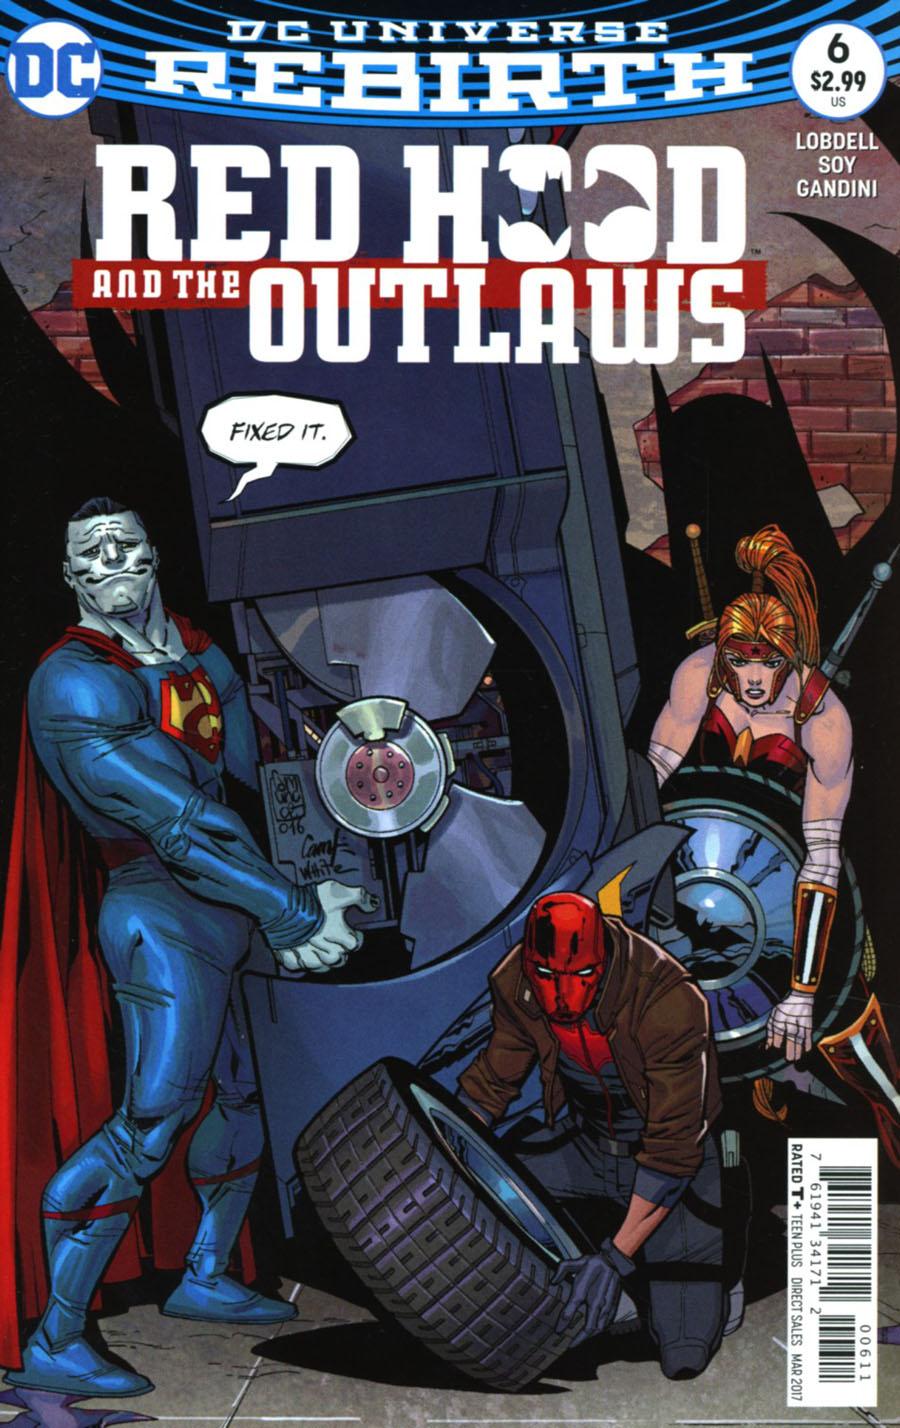 DC-2017 Red Hood And The Outlaws #15 March Variant Cover Edition